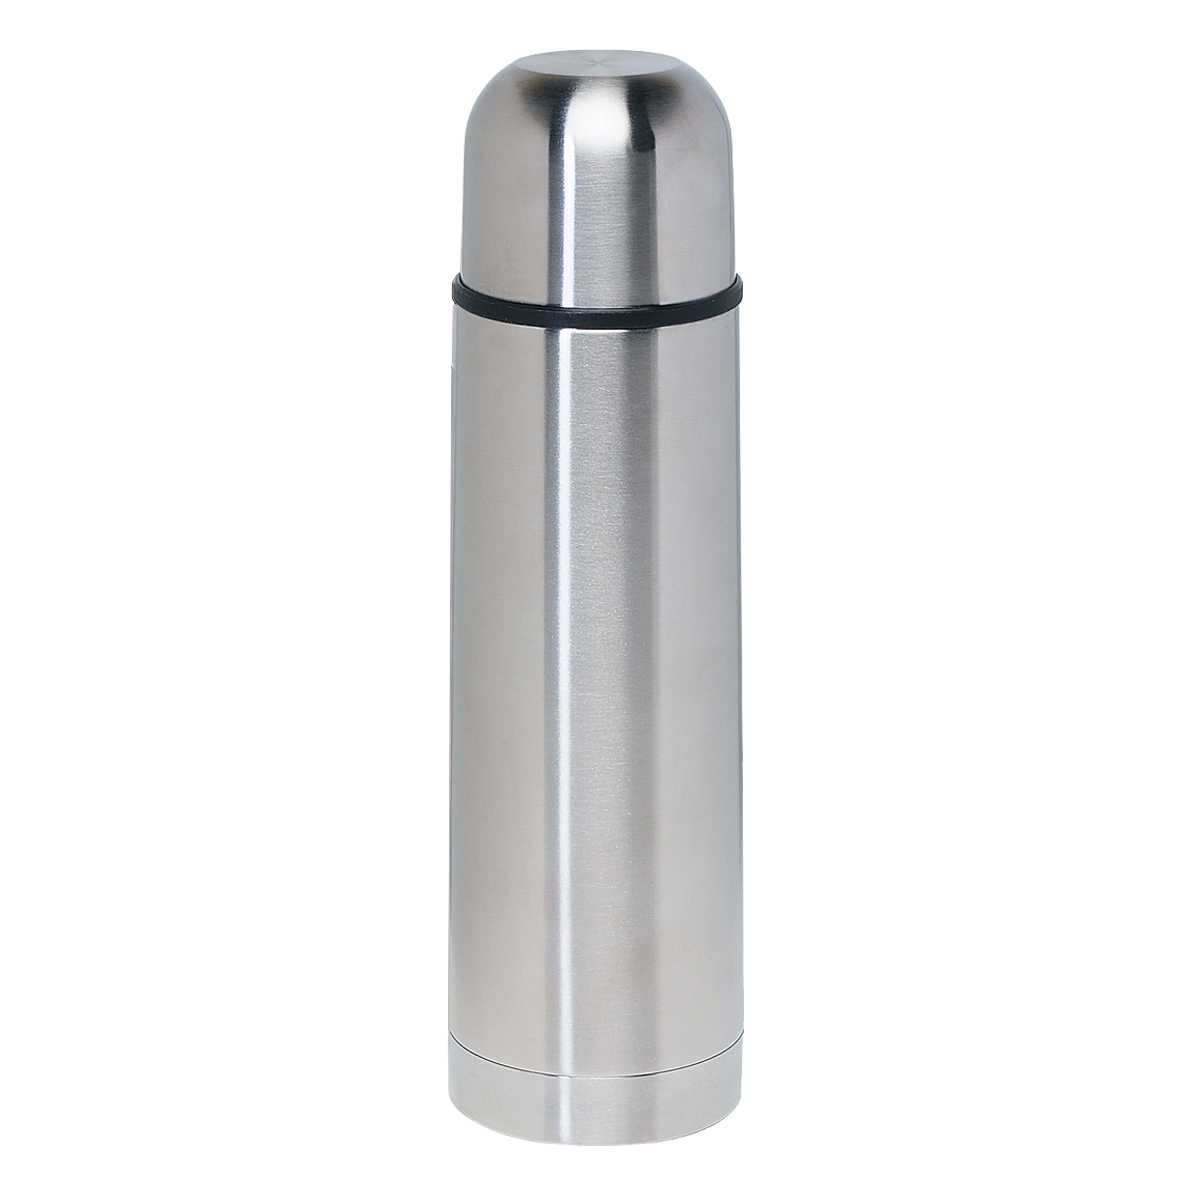 16-oz. Stainless Steel Thermos - Good Things USA